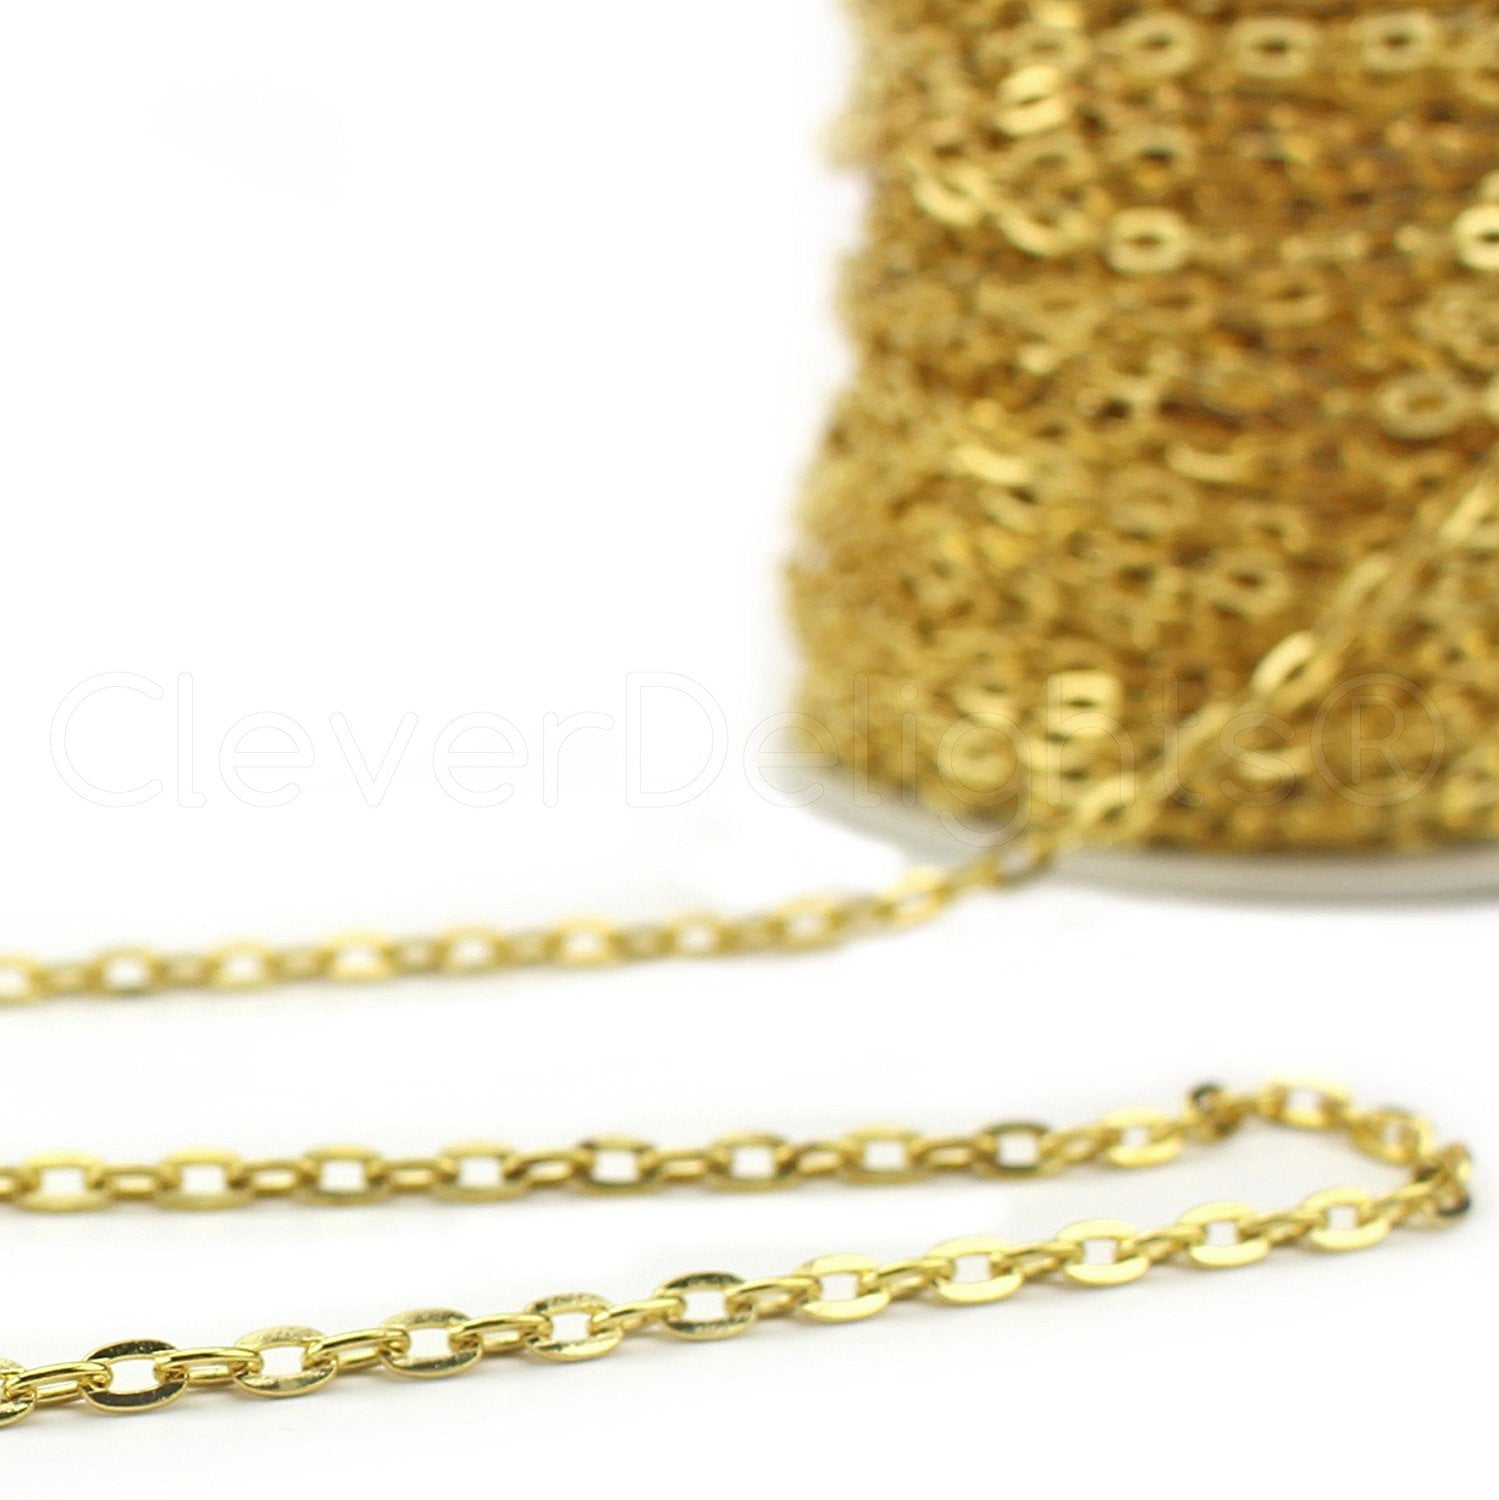 5x7mm Link 30 Feet Bulk Roll CleverDelights Cable Chain Spool Gold Color 10 Meters